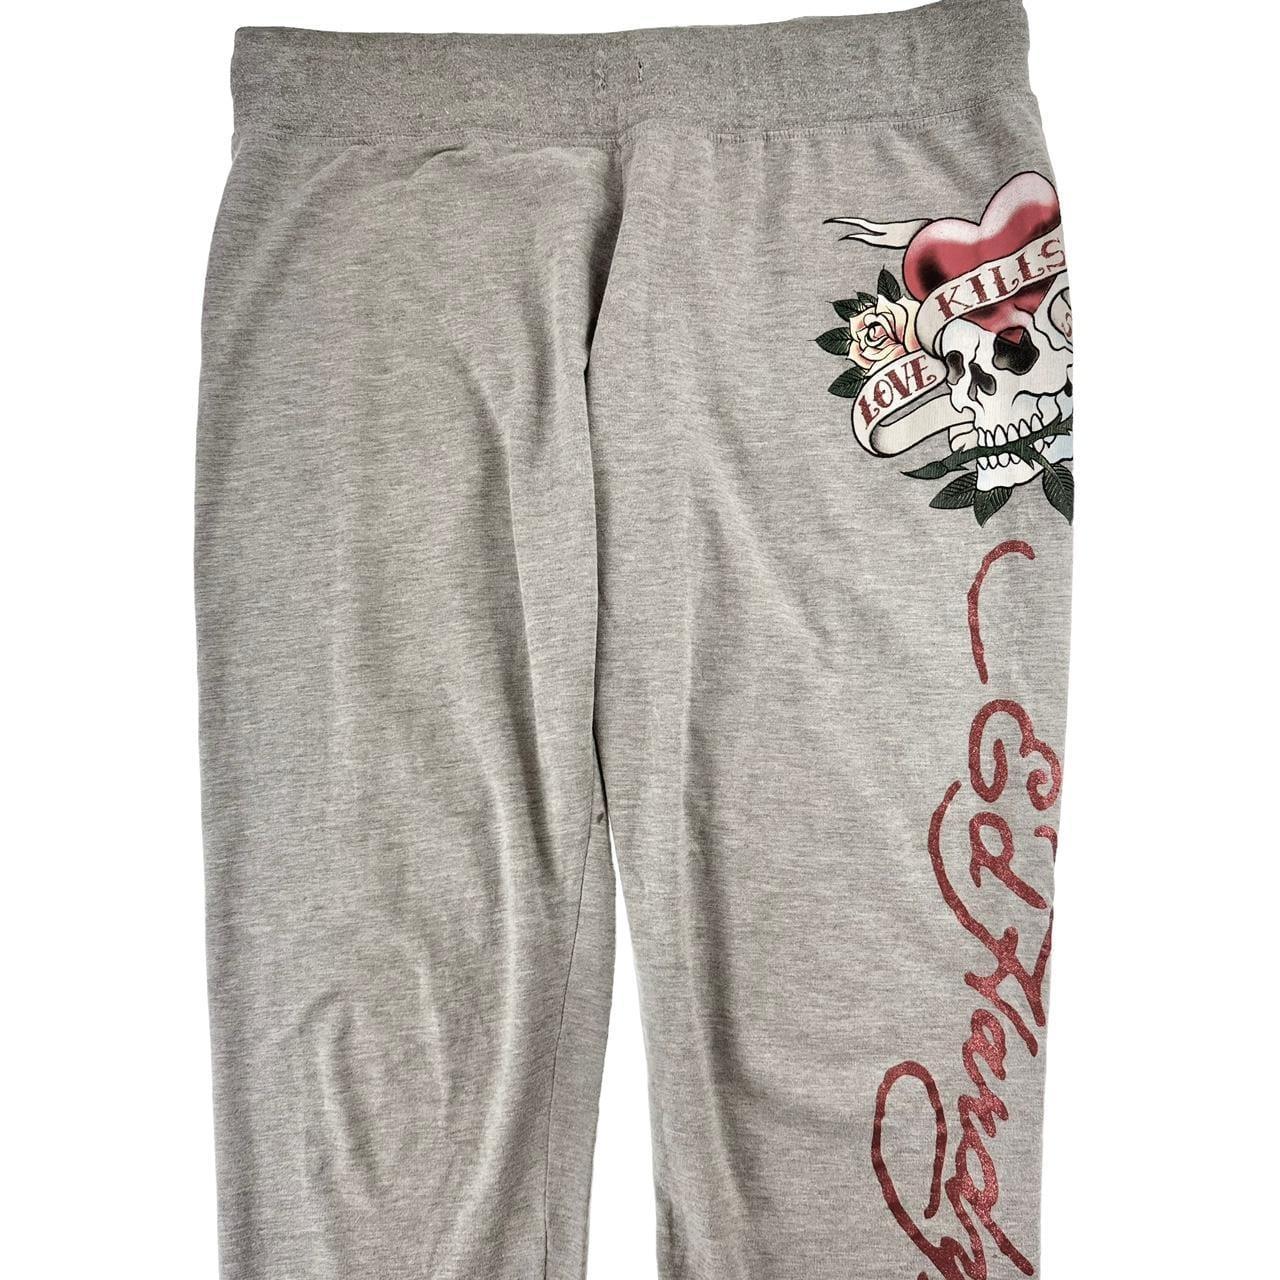 Ed Hardy joggers woman’s size XL - Known Source